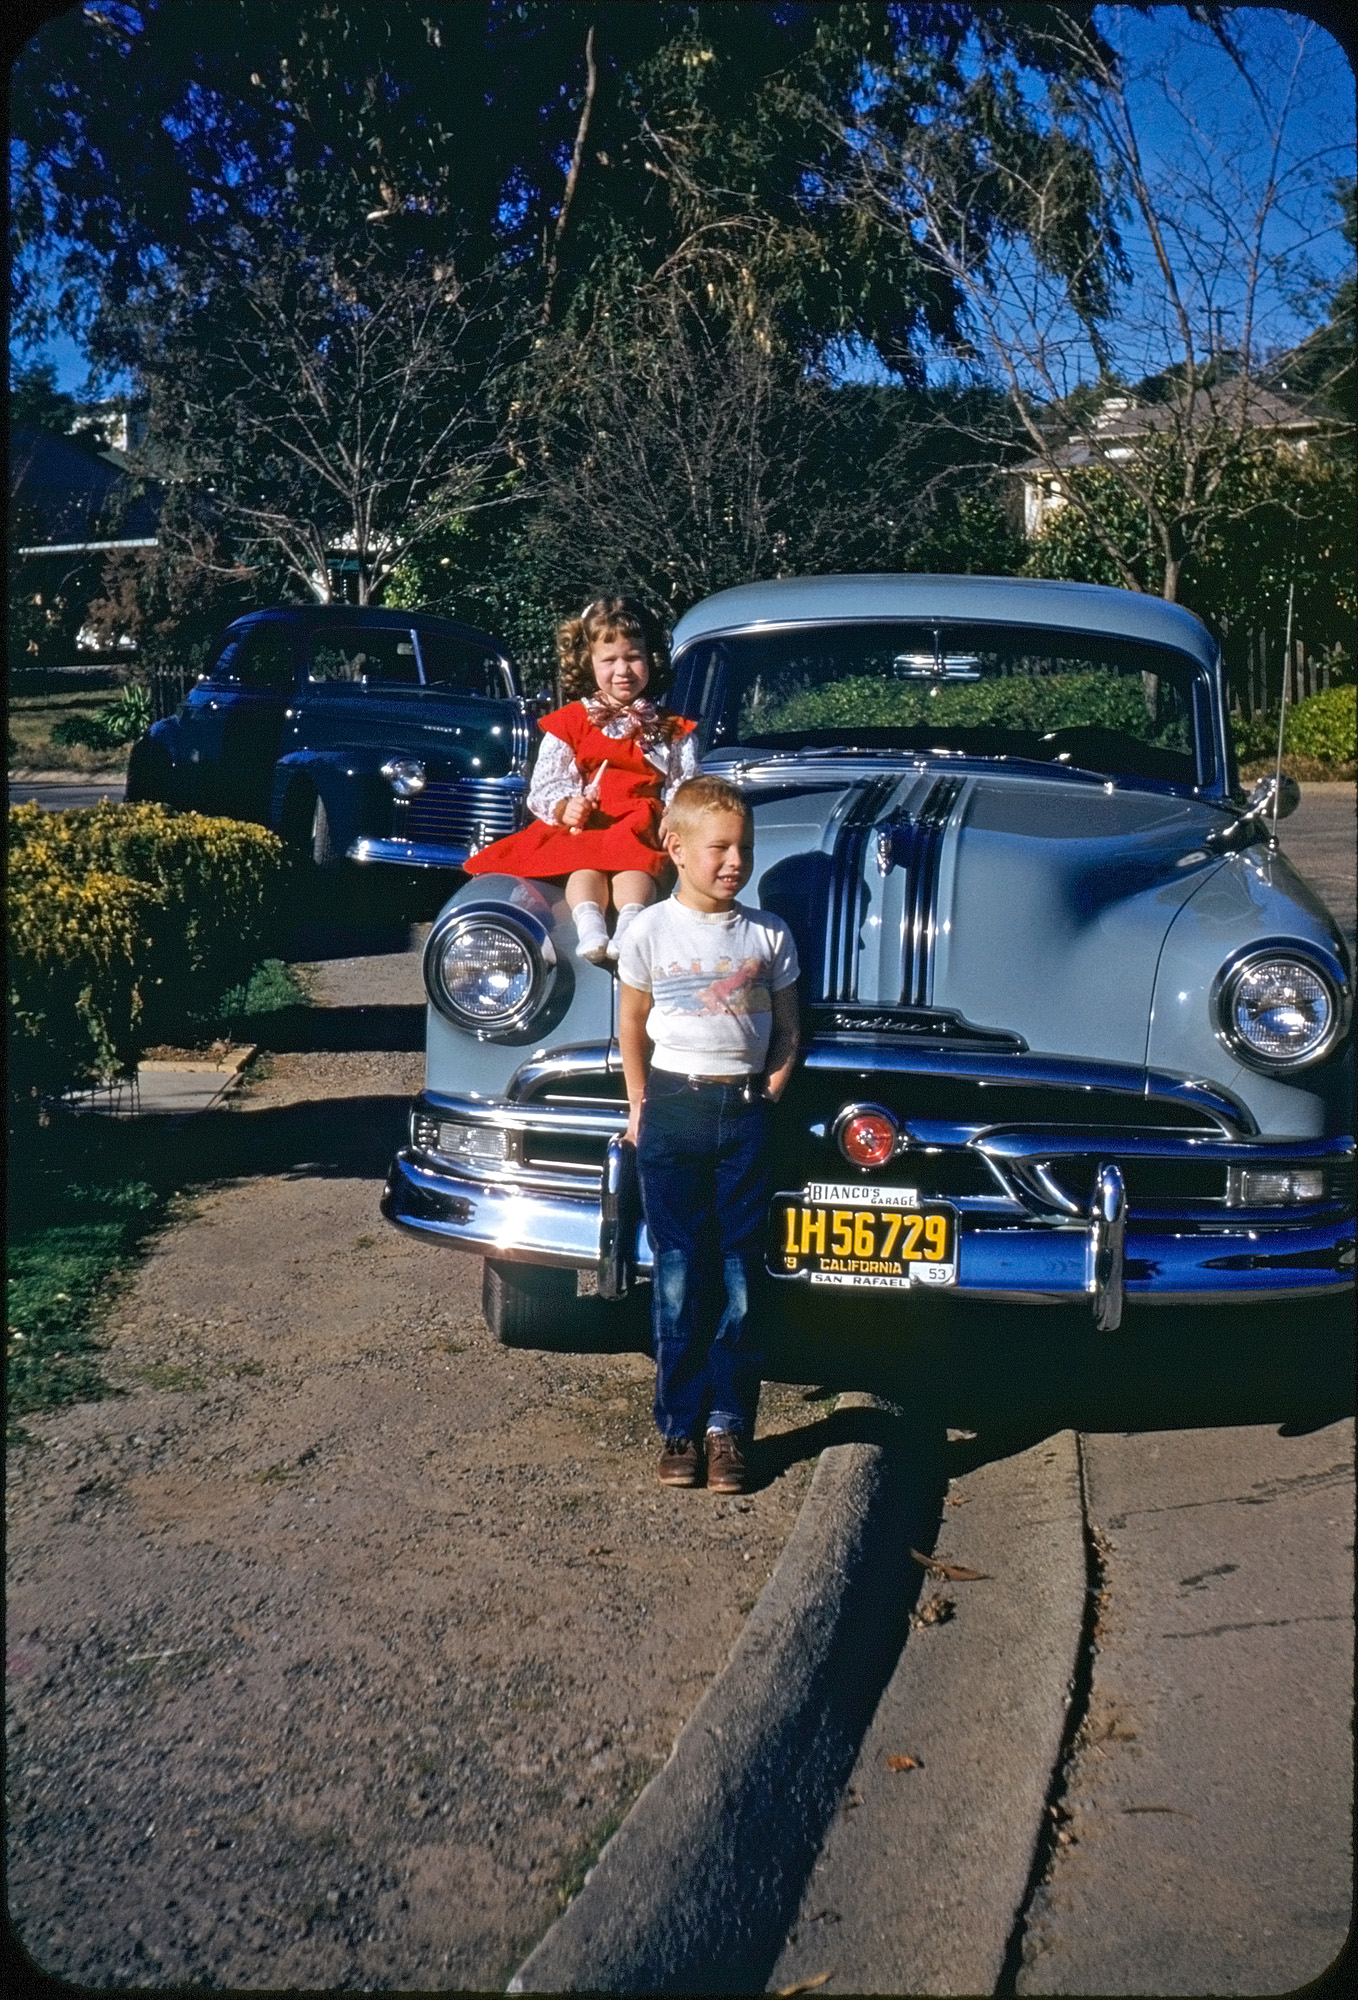 My best friend and his sister with a 1953 Pontiac on a late afternoon in front of their home in Larkspur, California. Since their own family car was the 1941 Pontiac in the background, I'm assuming this shot was taken by the owner of the new one. The dealer, Bianco, was a long-time car dealership in Marin County up through the 2000s. At the time David and I were in the first grade together at Larkspur-Corte Madera School, just three blocks away. Earlier this year you saw us both at his sixth birthday party in this photo. He's no longer with us, but his sister has loaned me her family photos to peruse and has given me permission to post this scan I made of this particularly Kodachromalicious slide. View full size.